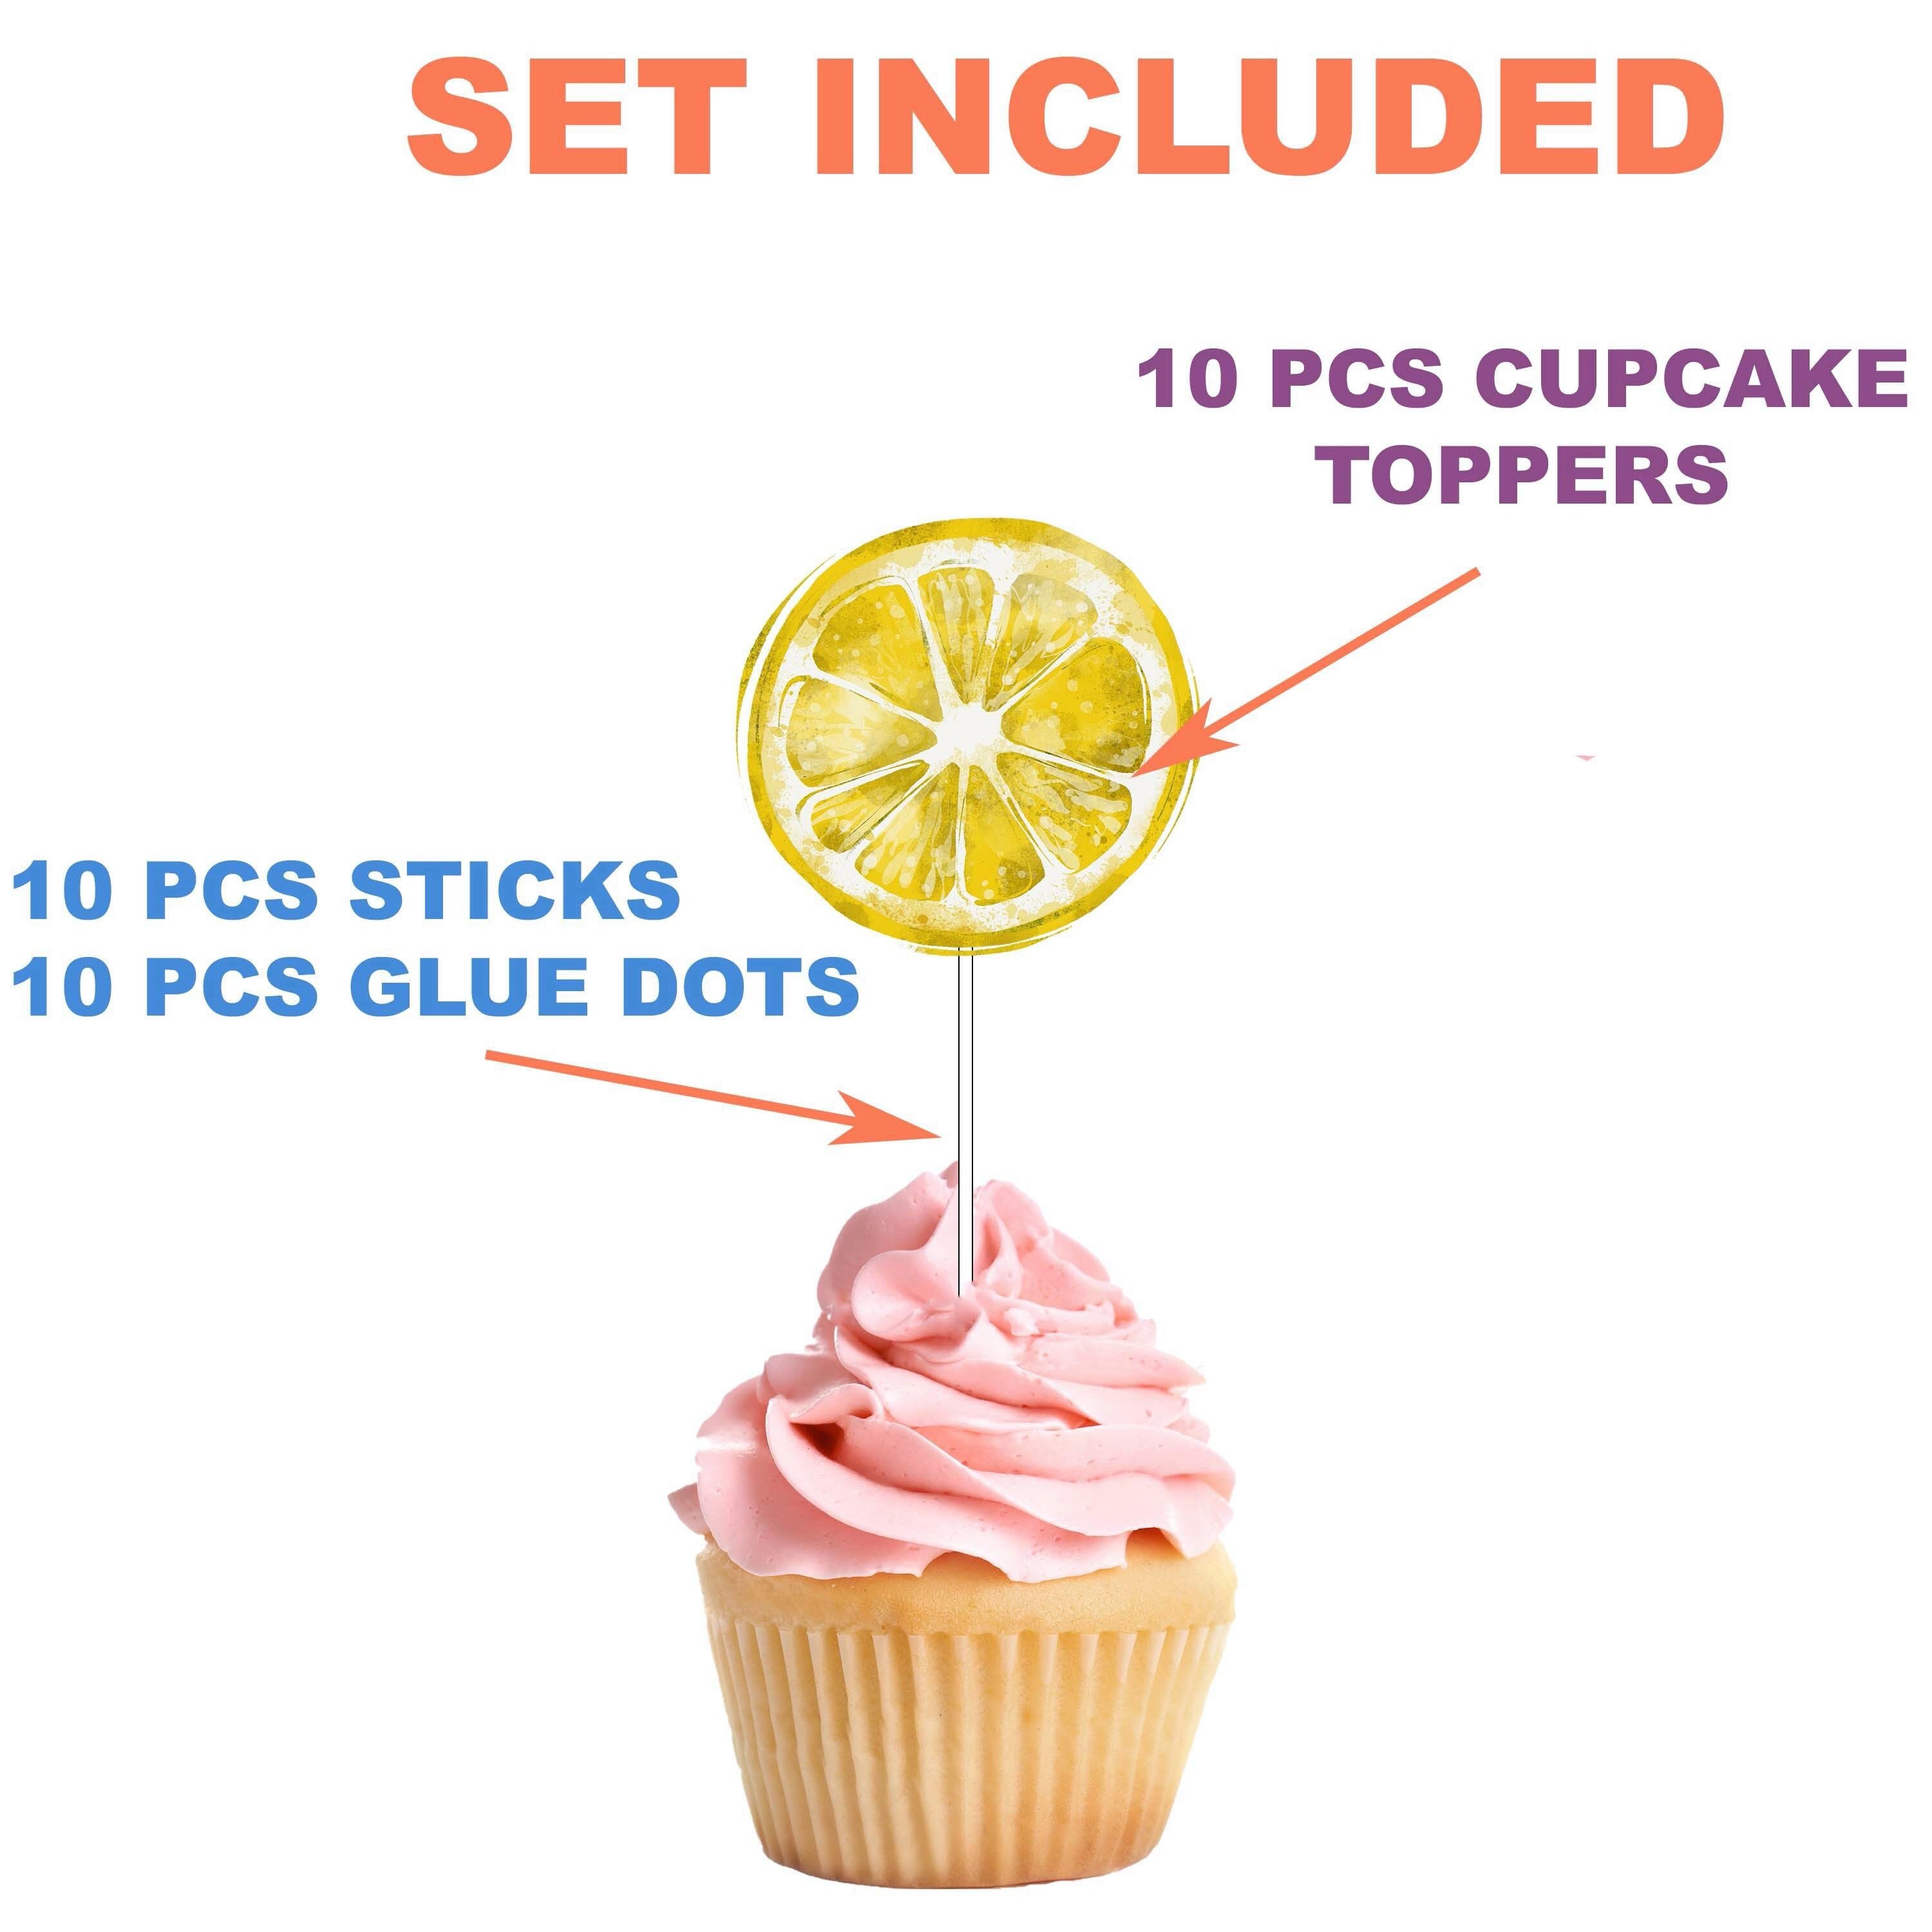 Lemon Zest Cupcake Toppers - Add a Twist of Citrus to Your Celebrations